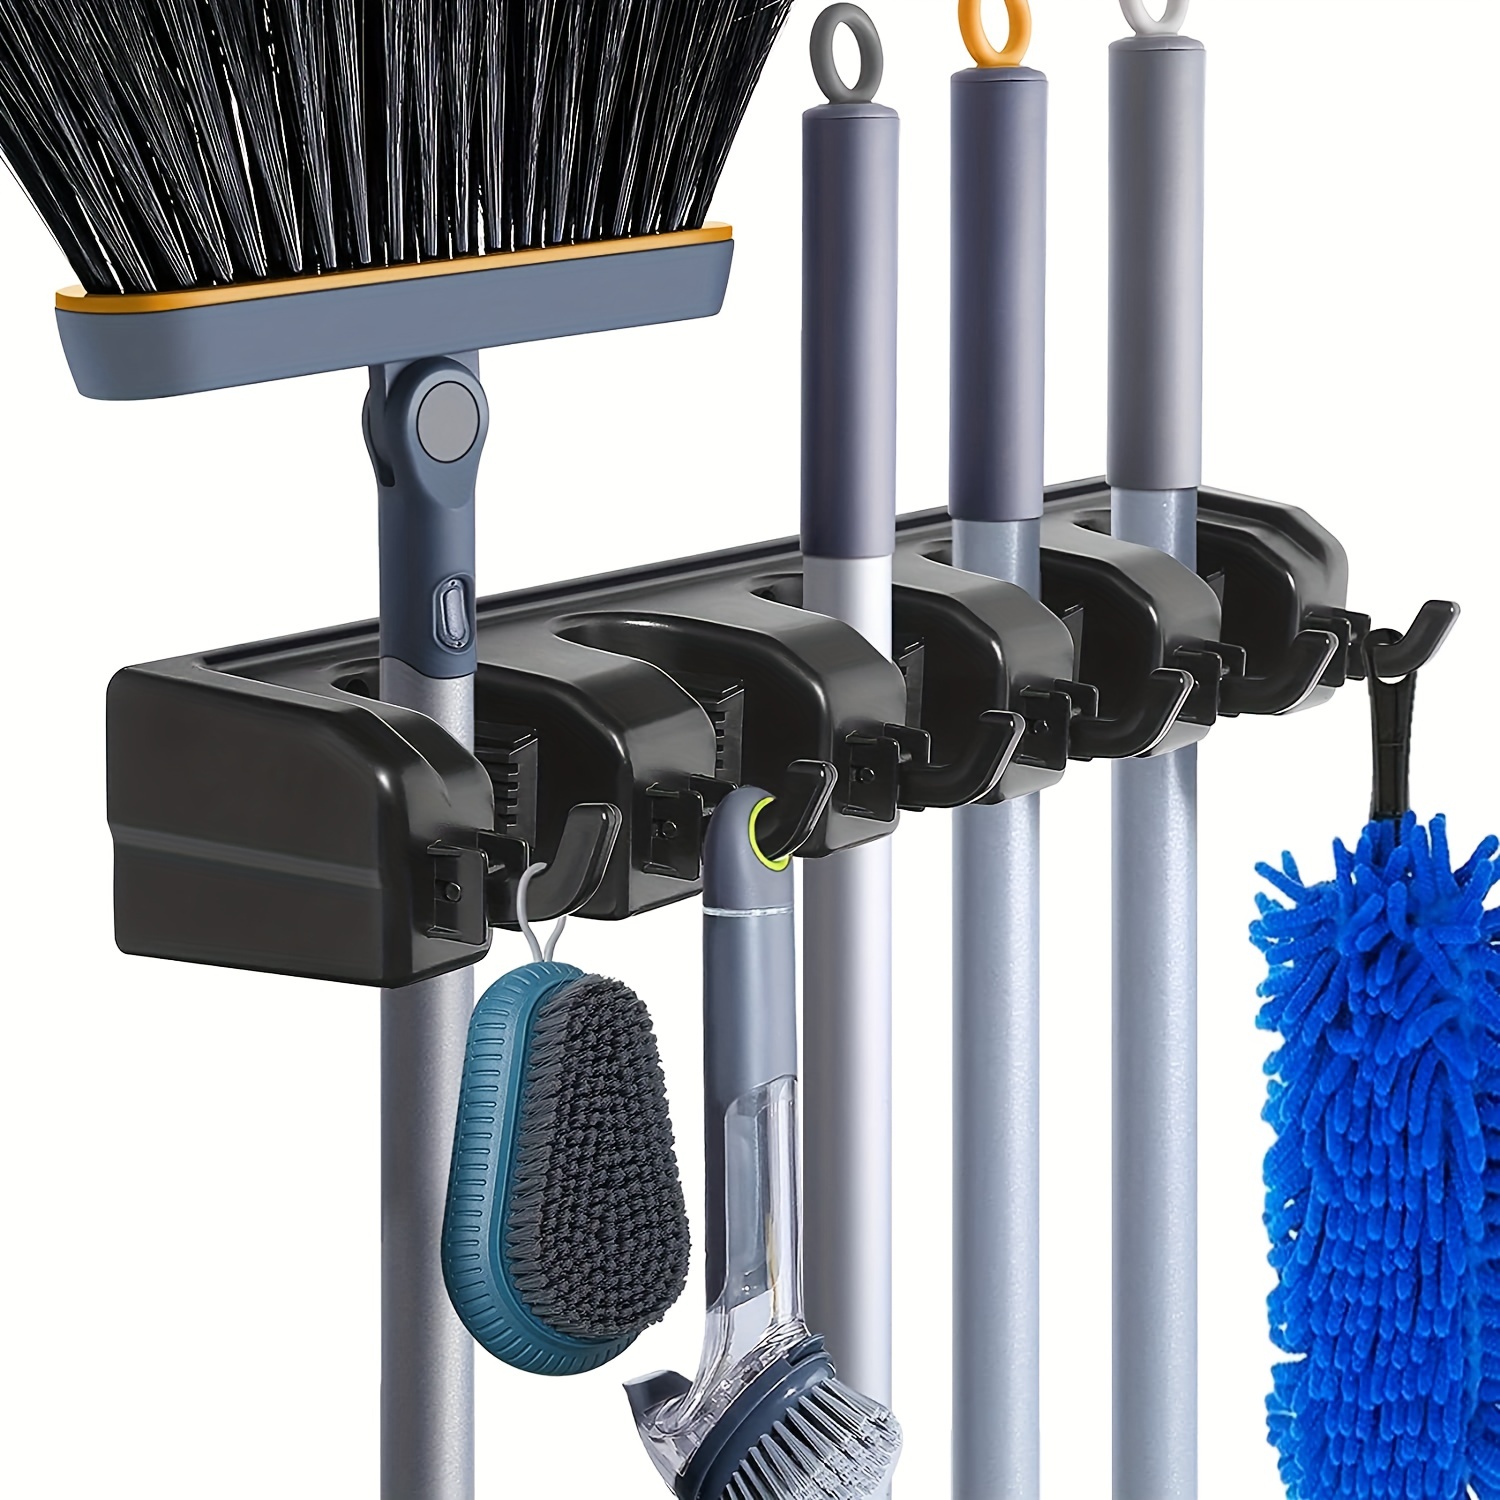 

1pc Wall Mounted Broom Tool Rack, Plastic Organizer Holder With 5 Slots & 6 Hooks, For Garden, Laundry Room, Shed, Garage - Easy To Install, Includes Mounting Hardware Accessories